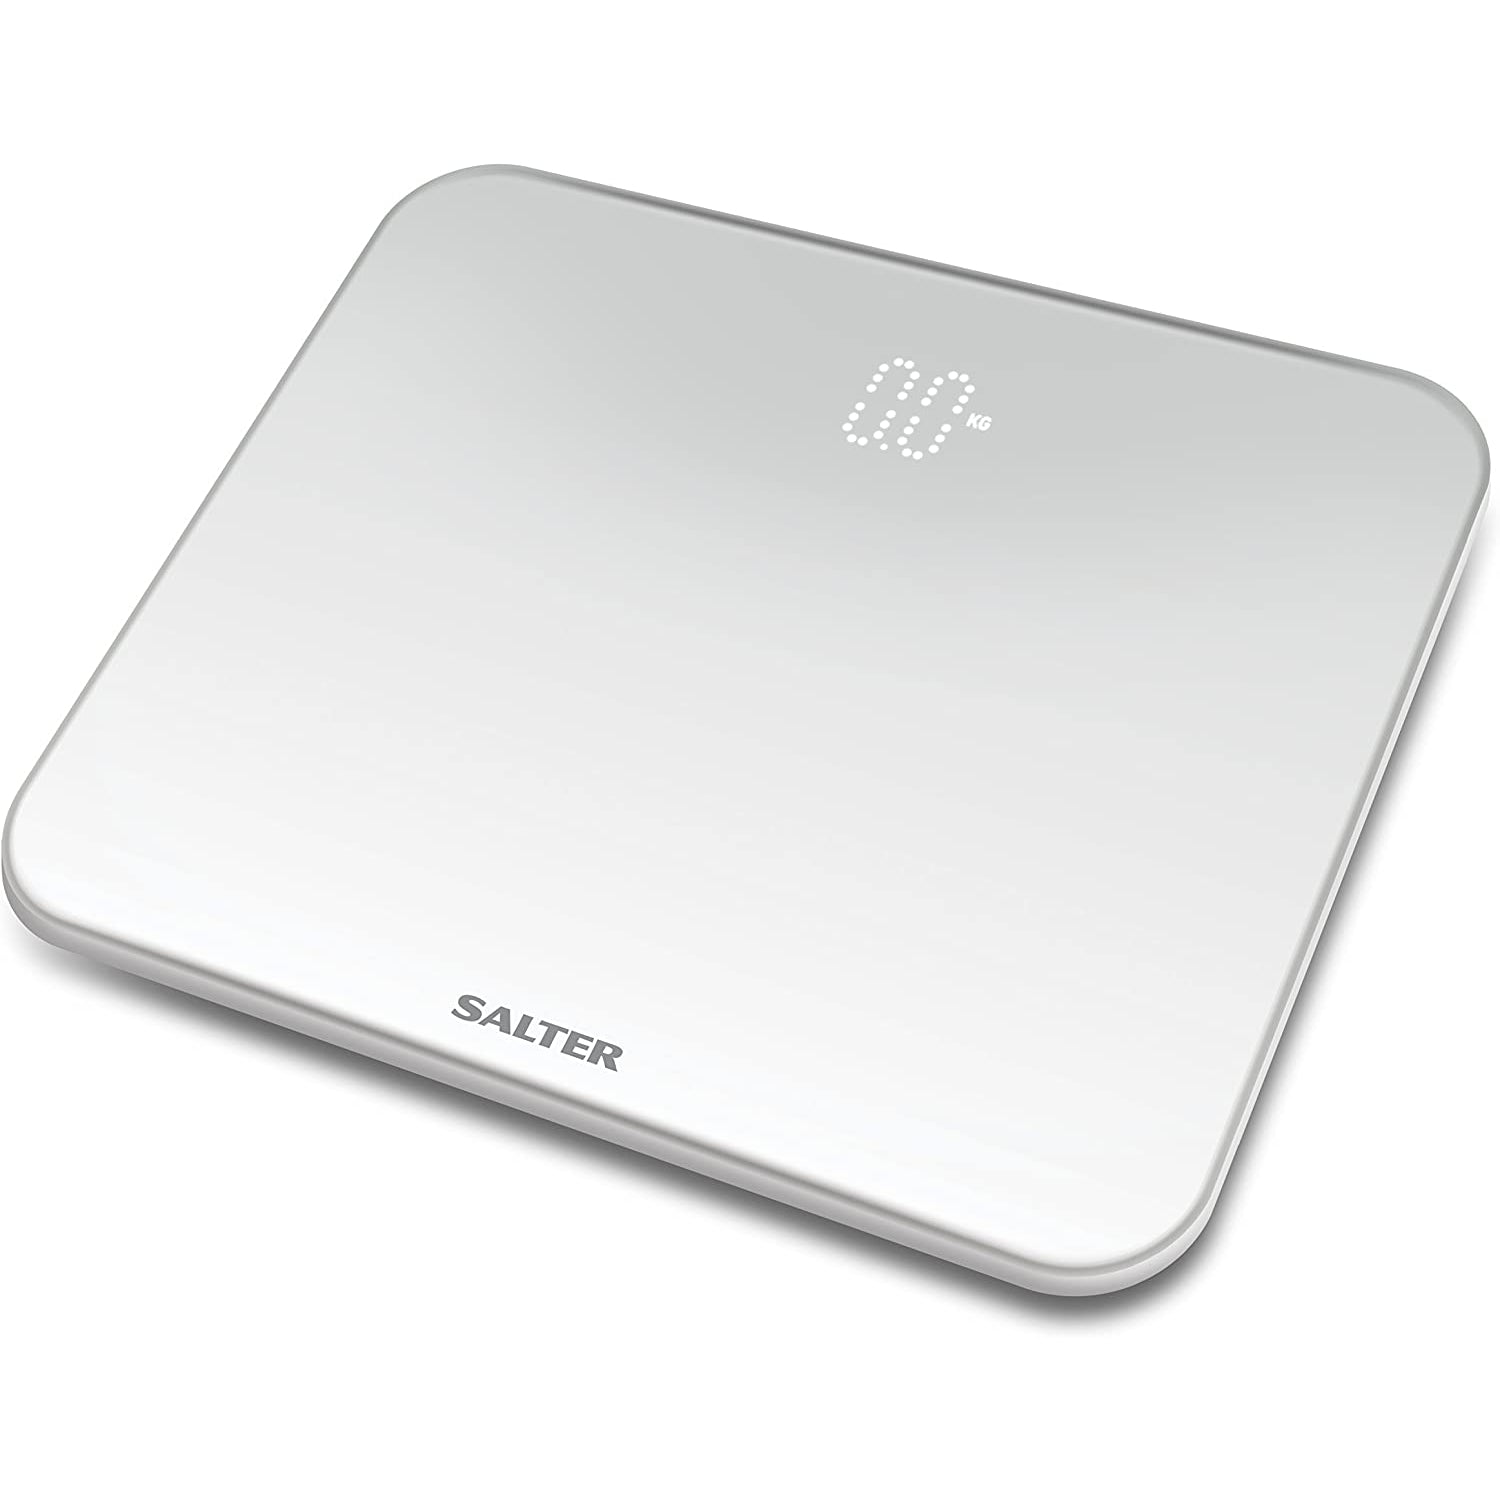 Salter 9204 WH3R Premium Compact Ghost Electronic Bathroom Scale